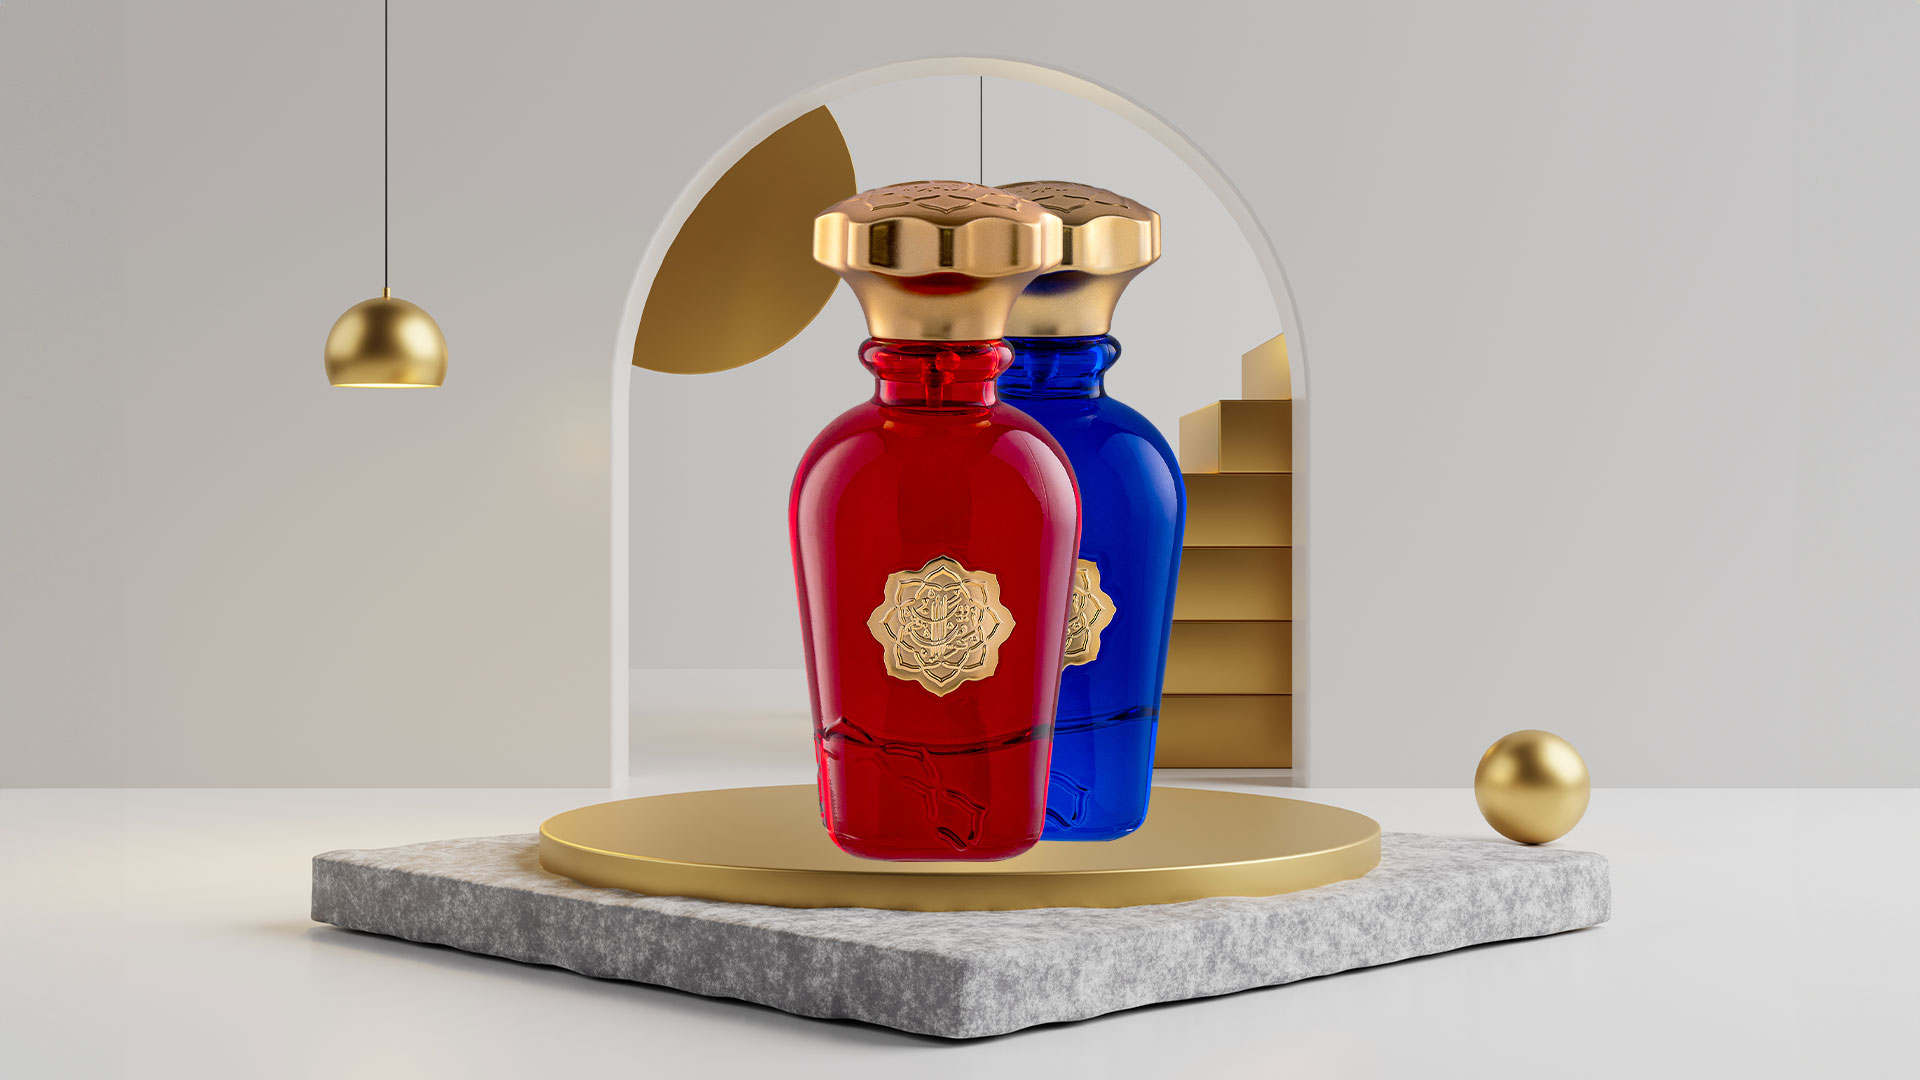 What Exactly Are Inspired Perfumes, and How Do They Differ from Original Brands? ​